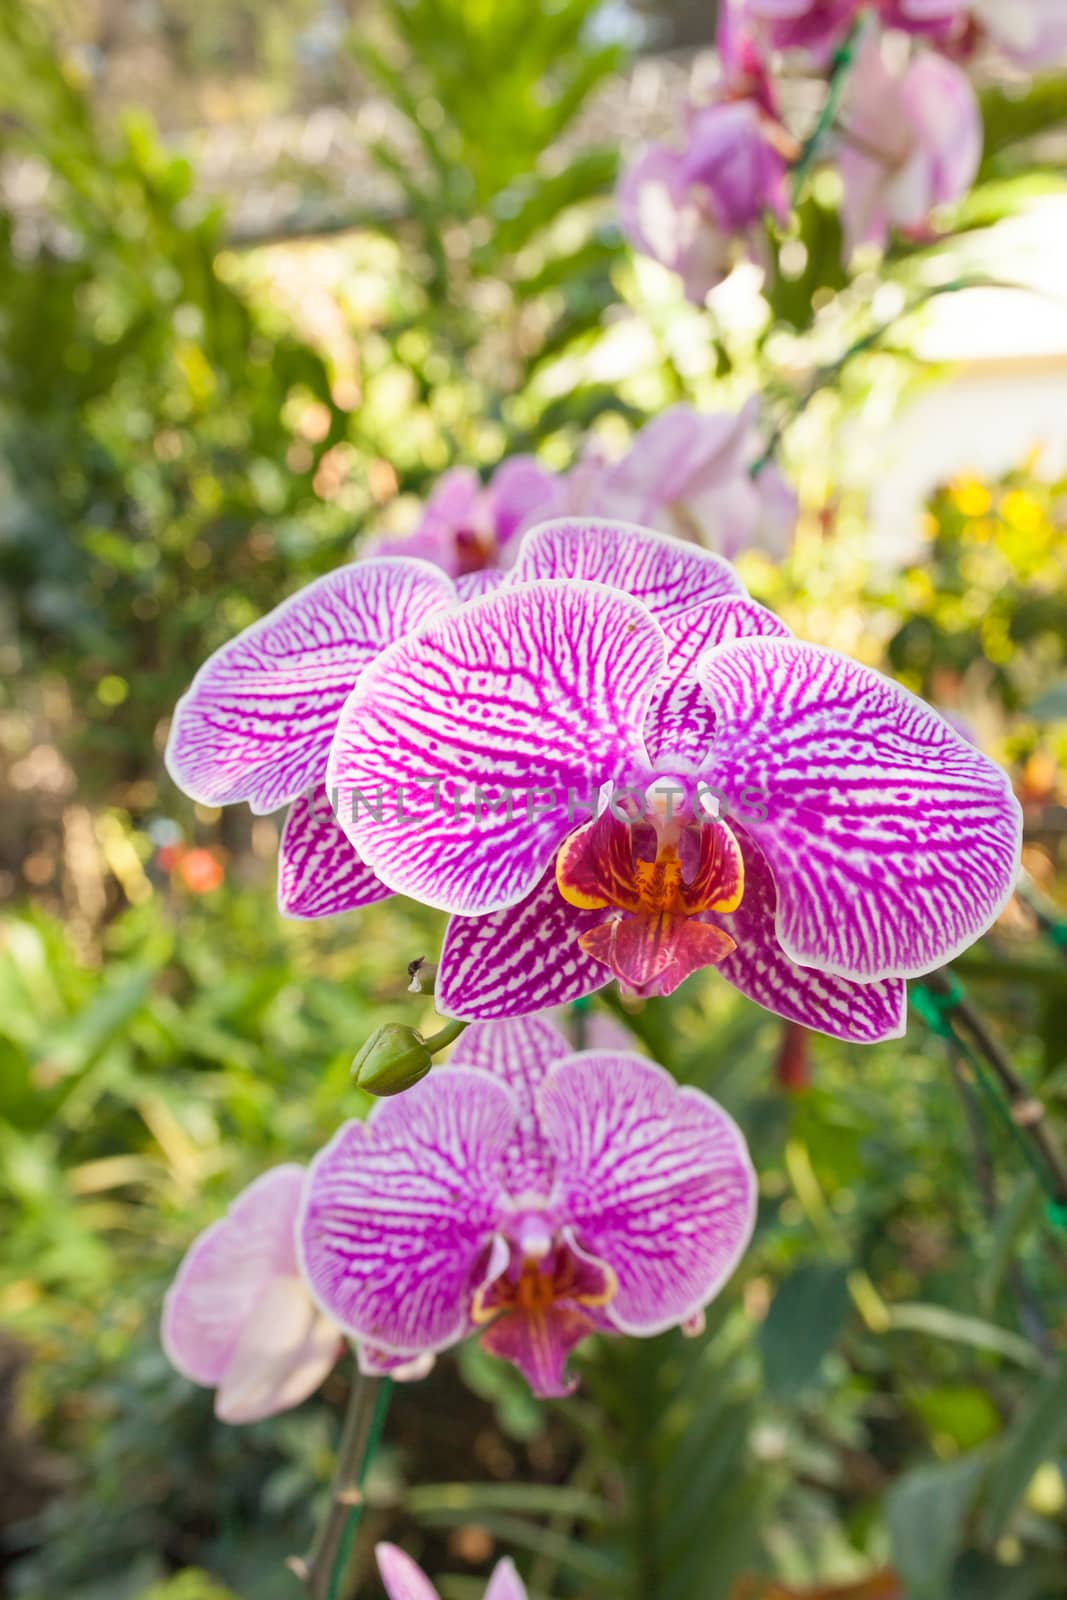 Orchid purple speckled The name of The flower due to similarity of the flower.